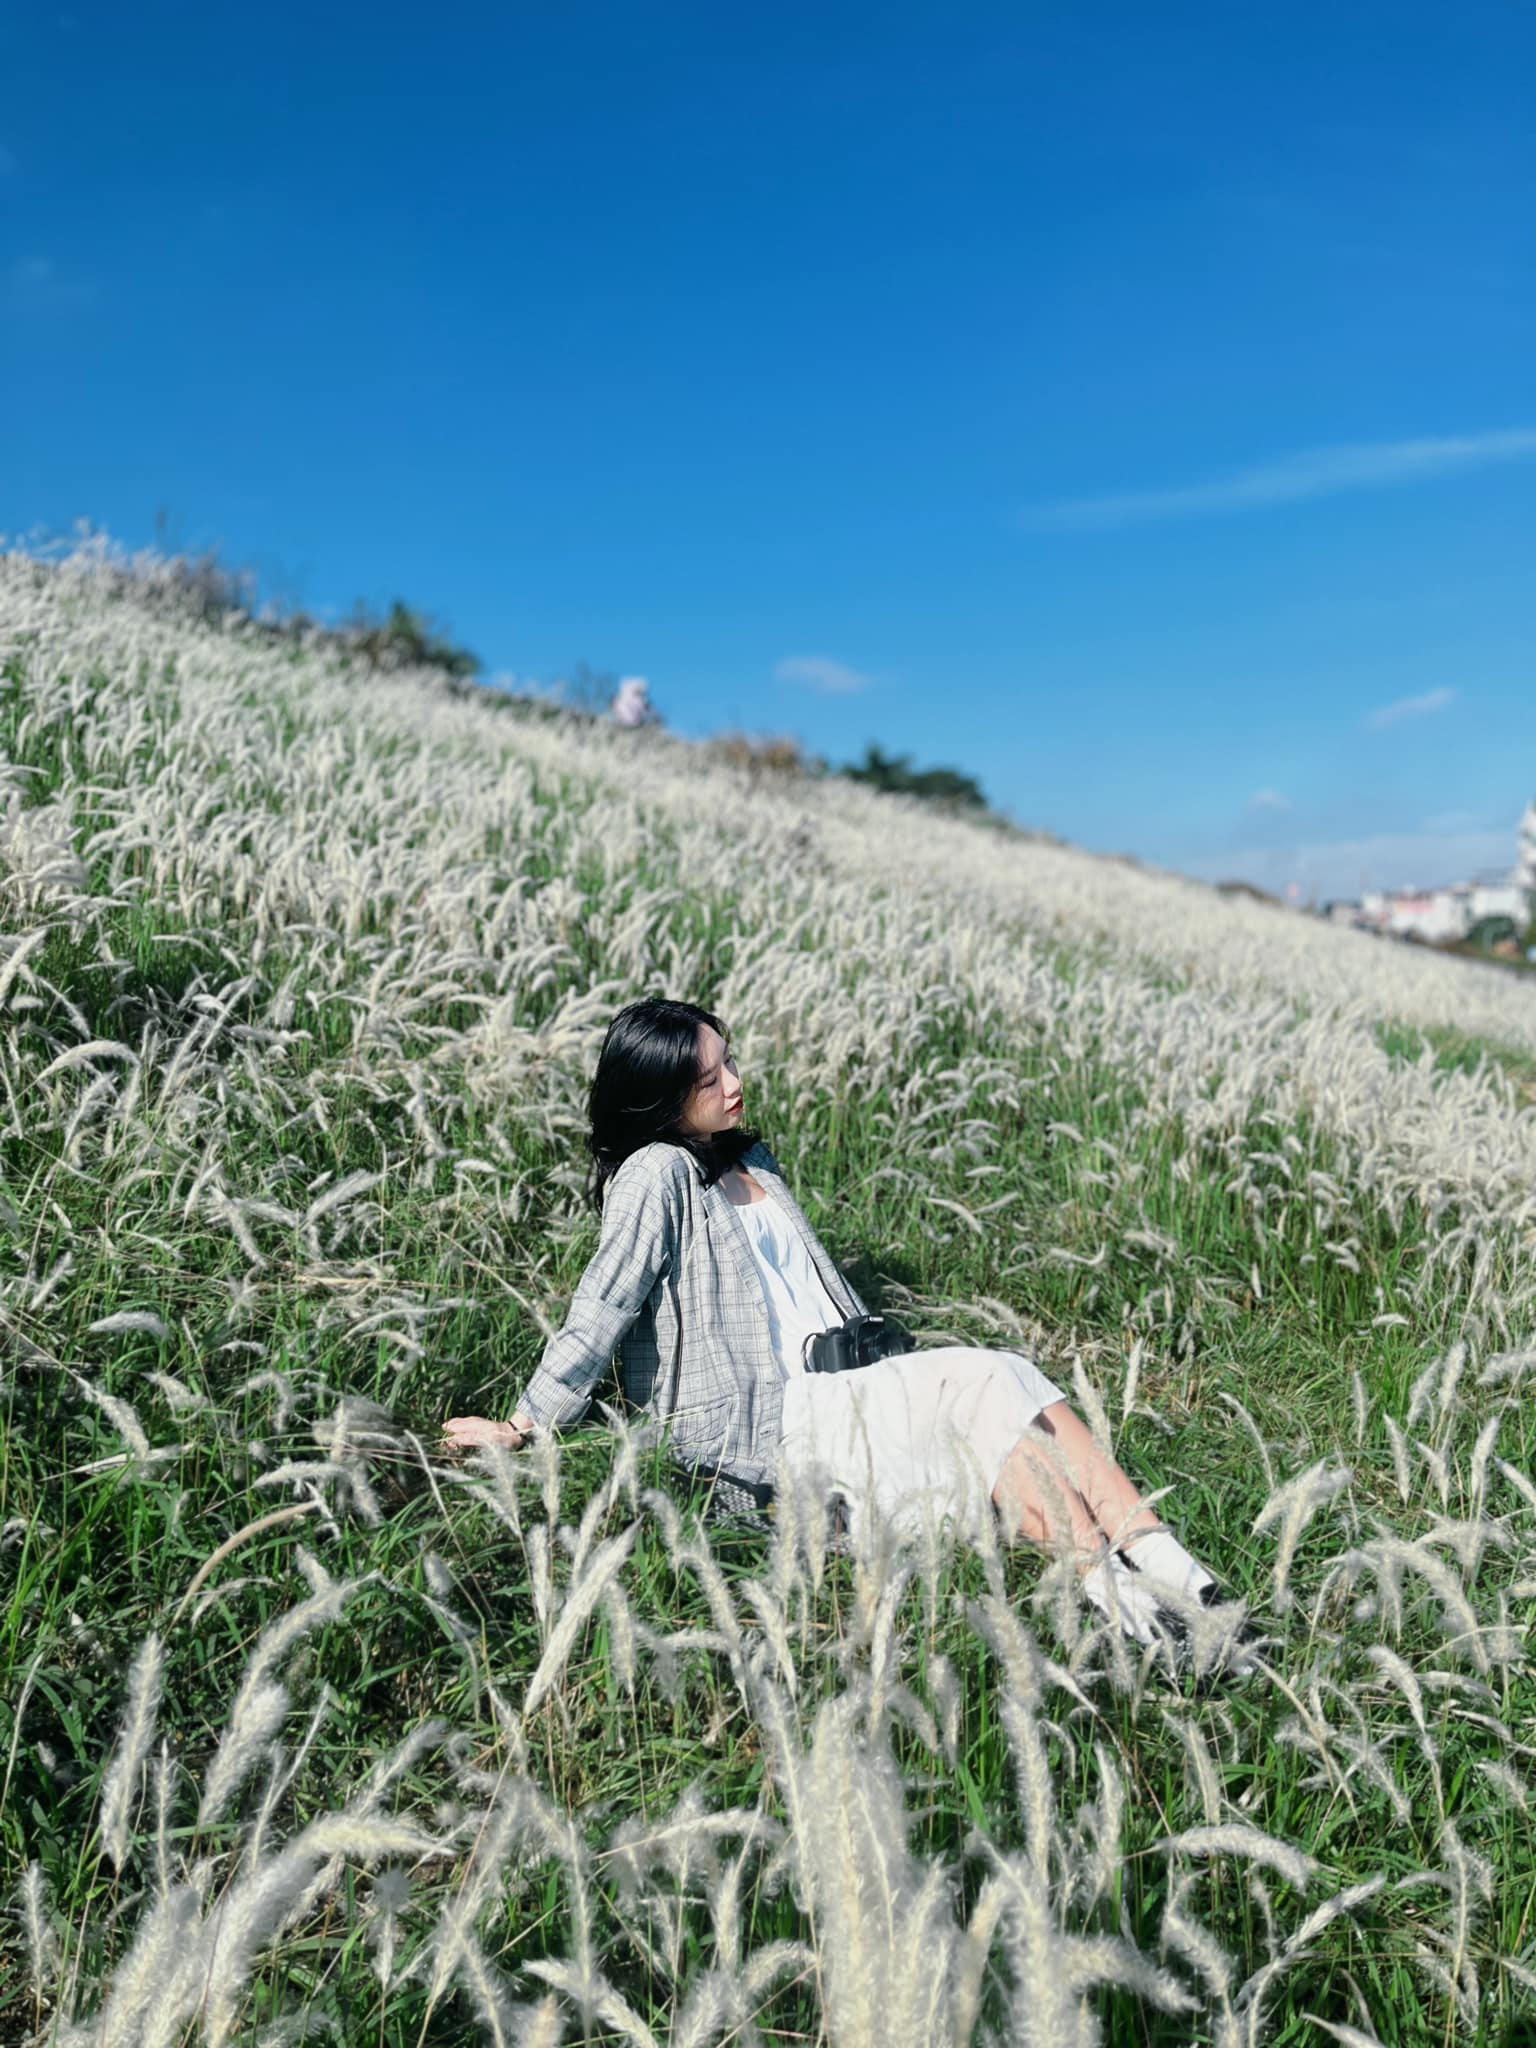 A woman poses for pictures at a white reed field on the embankment along the Red River section in Long Bien District, Hanoi, November 28, 2022. Photo: Huong Nguyen / Tuoi Tre